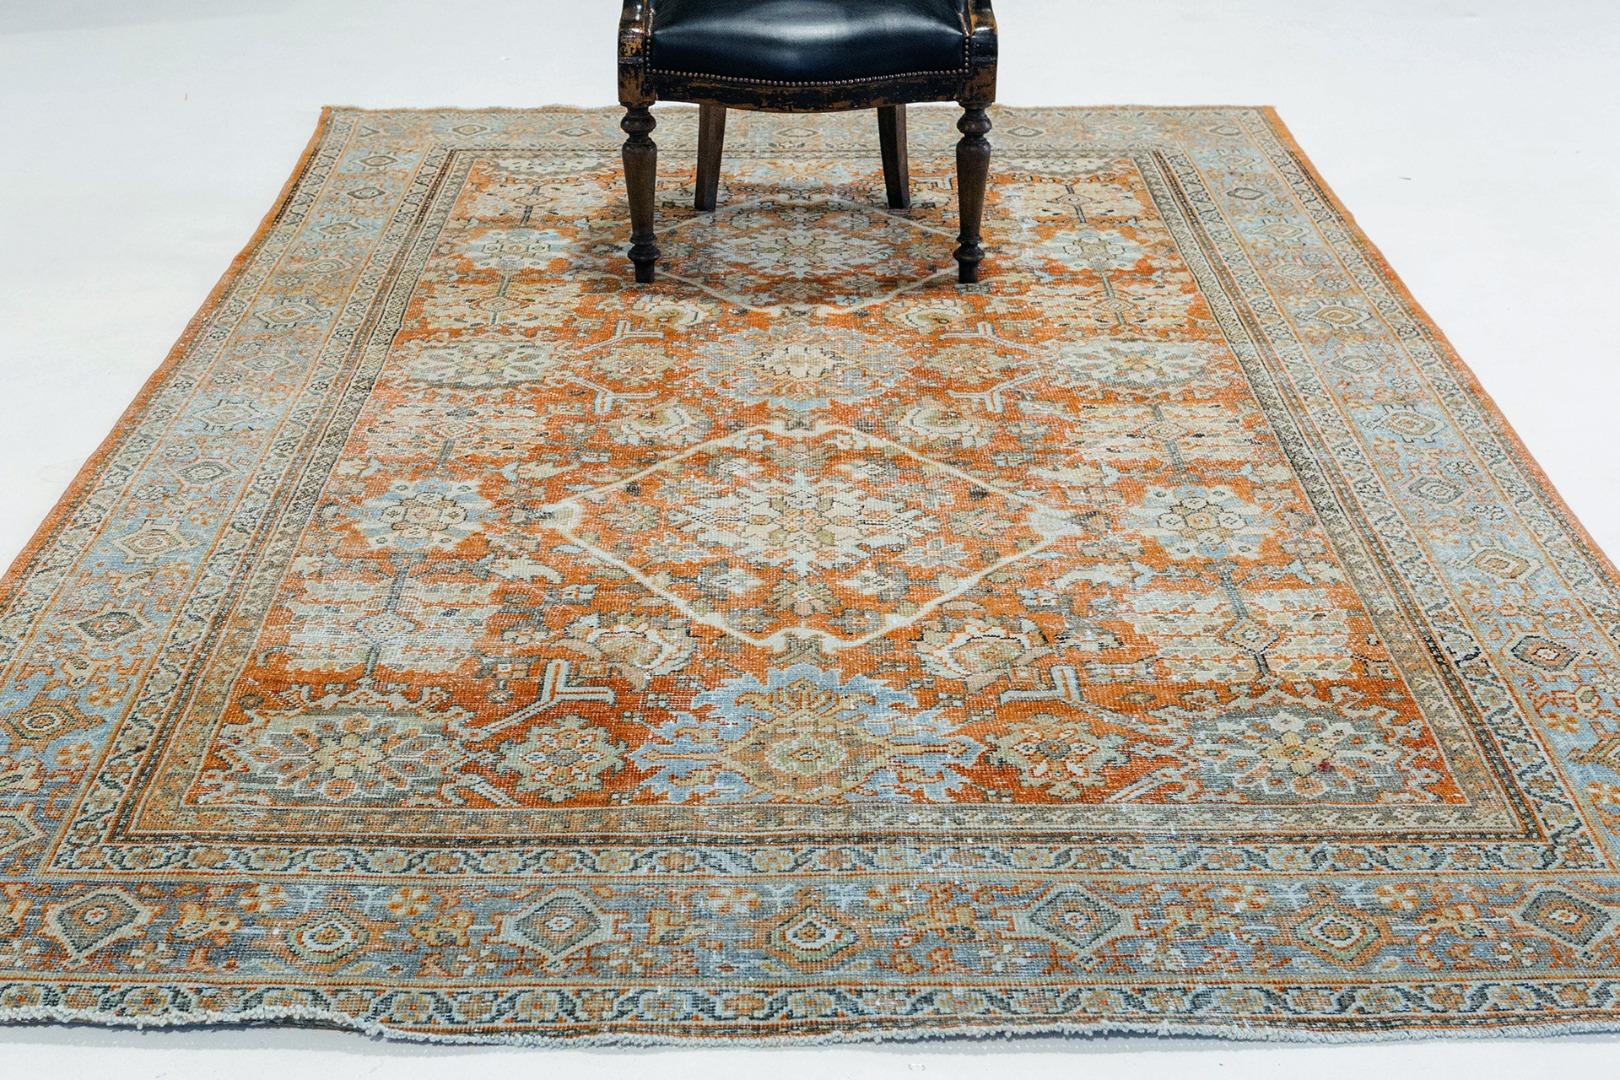 This antique Persian Mahal is the epitome of luxury. A series of ornate borders frames the piece, with geometric patterns being dominant. Within the field, an elegant and classical all-over pattern of flowering vine scrolls unfolds, the drawing of